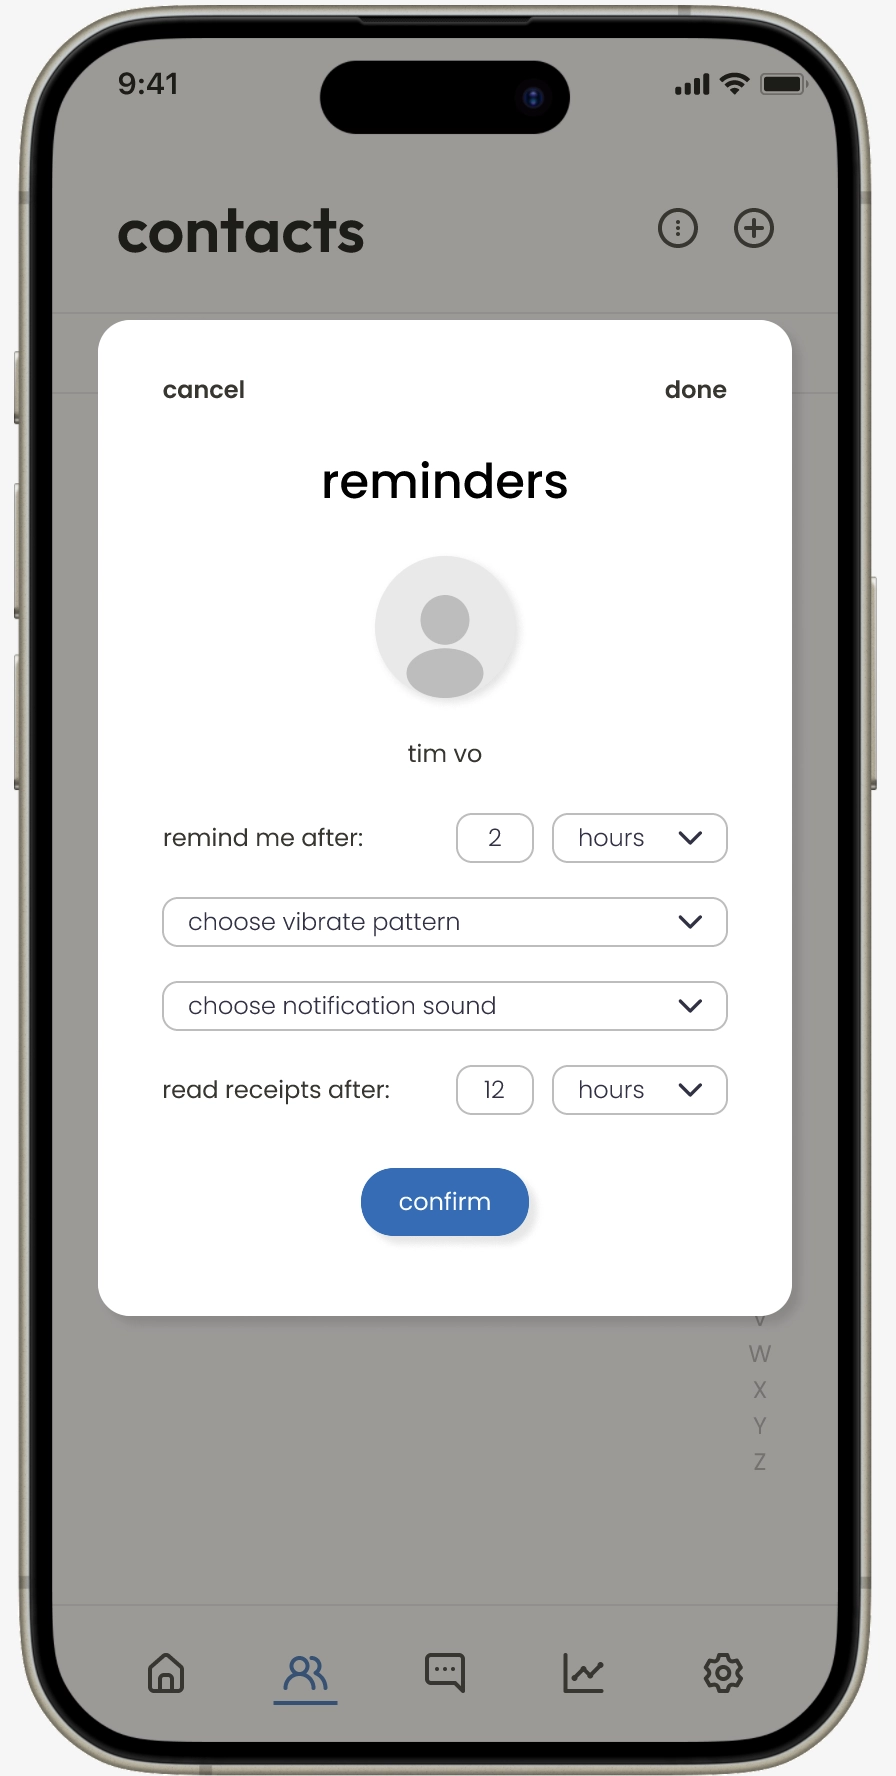 Set reminders for new contact. Enter reminder time and vibrate and sound patterns.